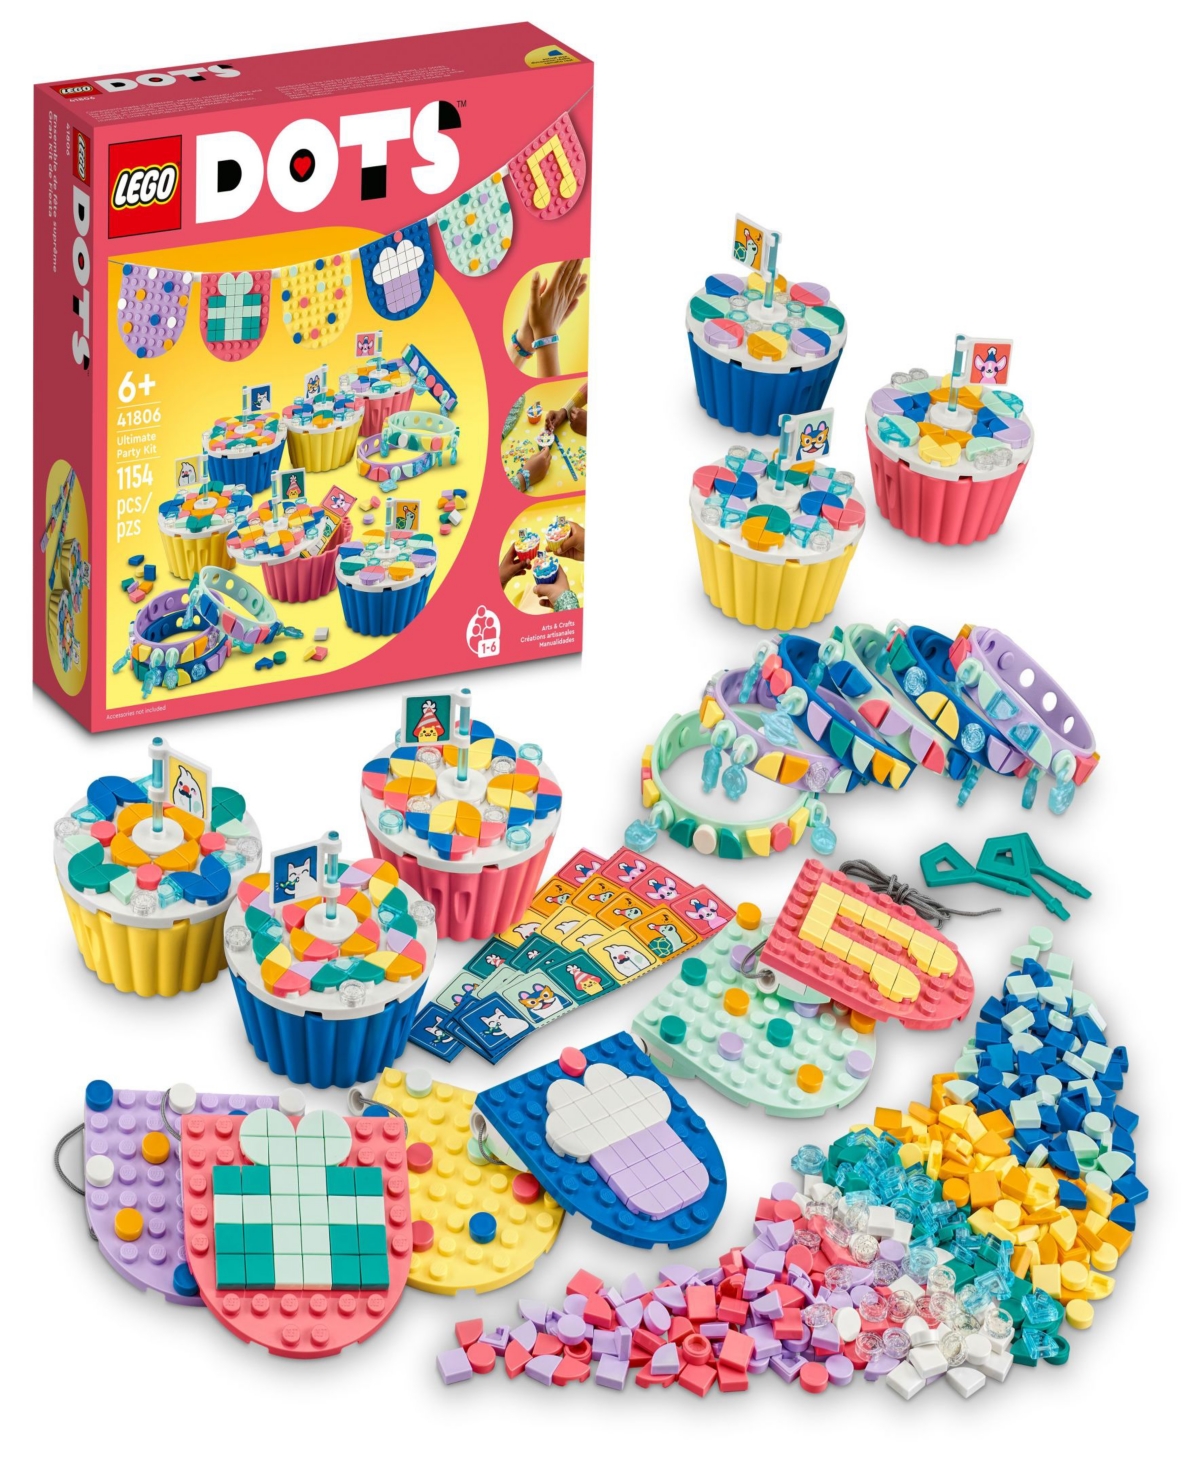 Lego Dots Ultimate Party Kit 41806 Diy Craft Decoration Kit, 1,154 Pieces In Multicolor